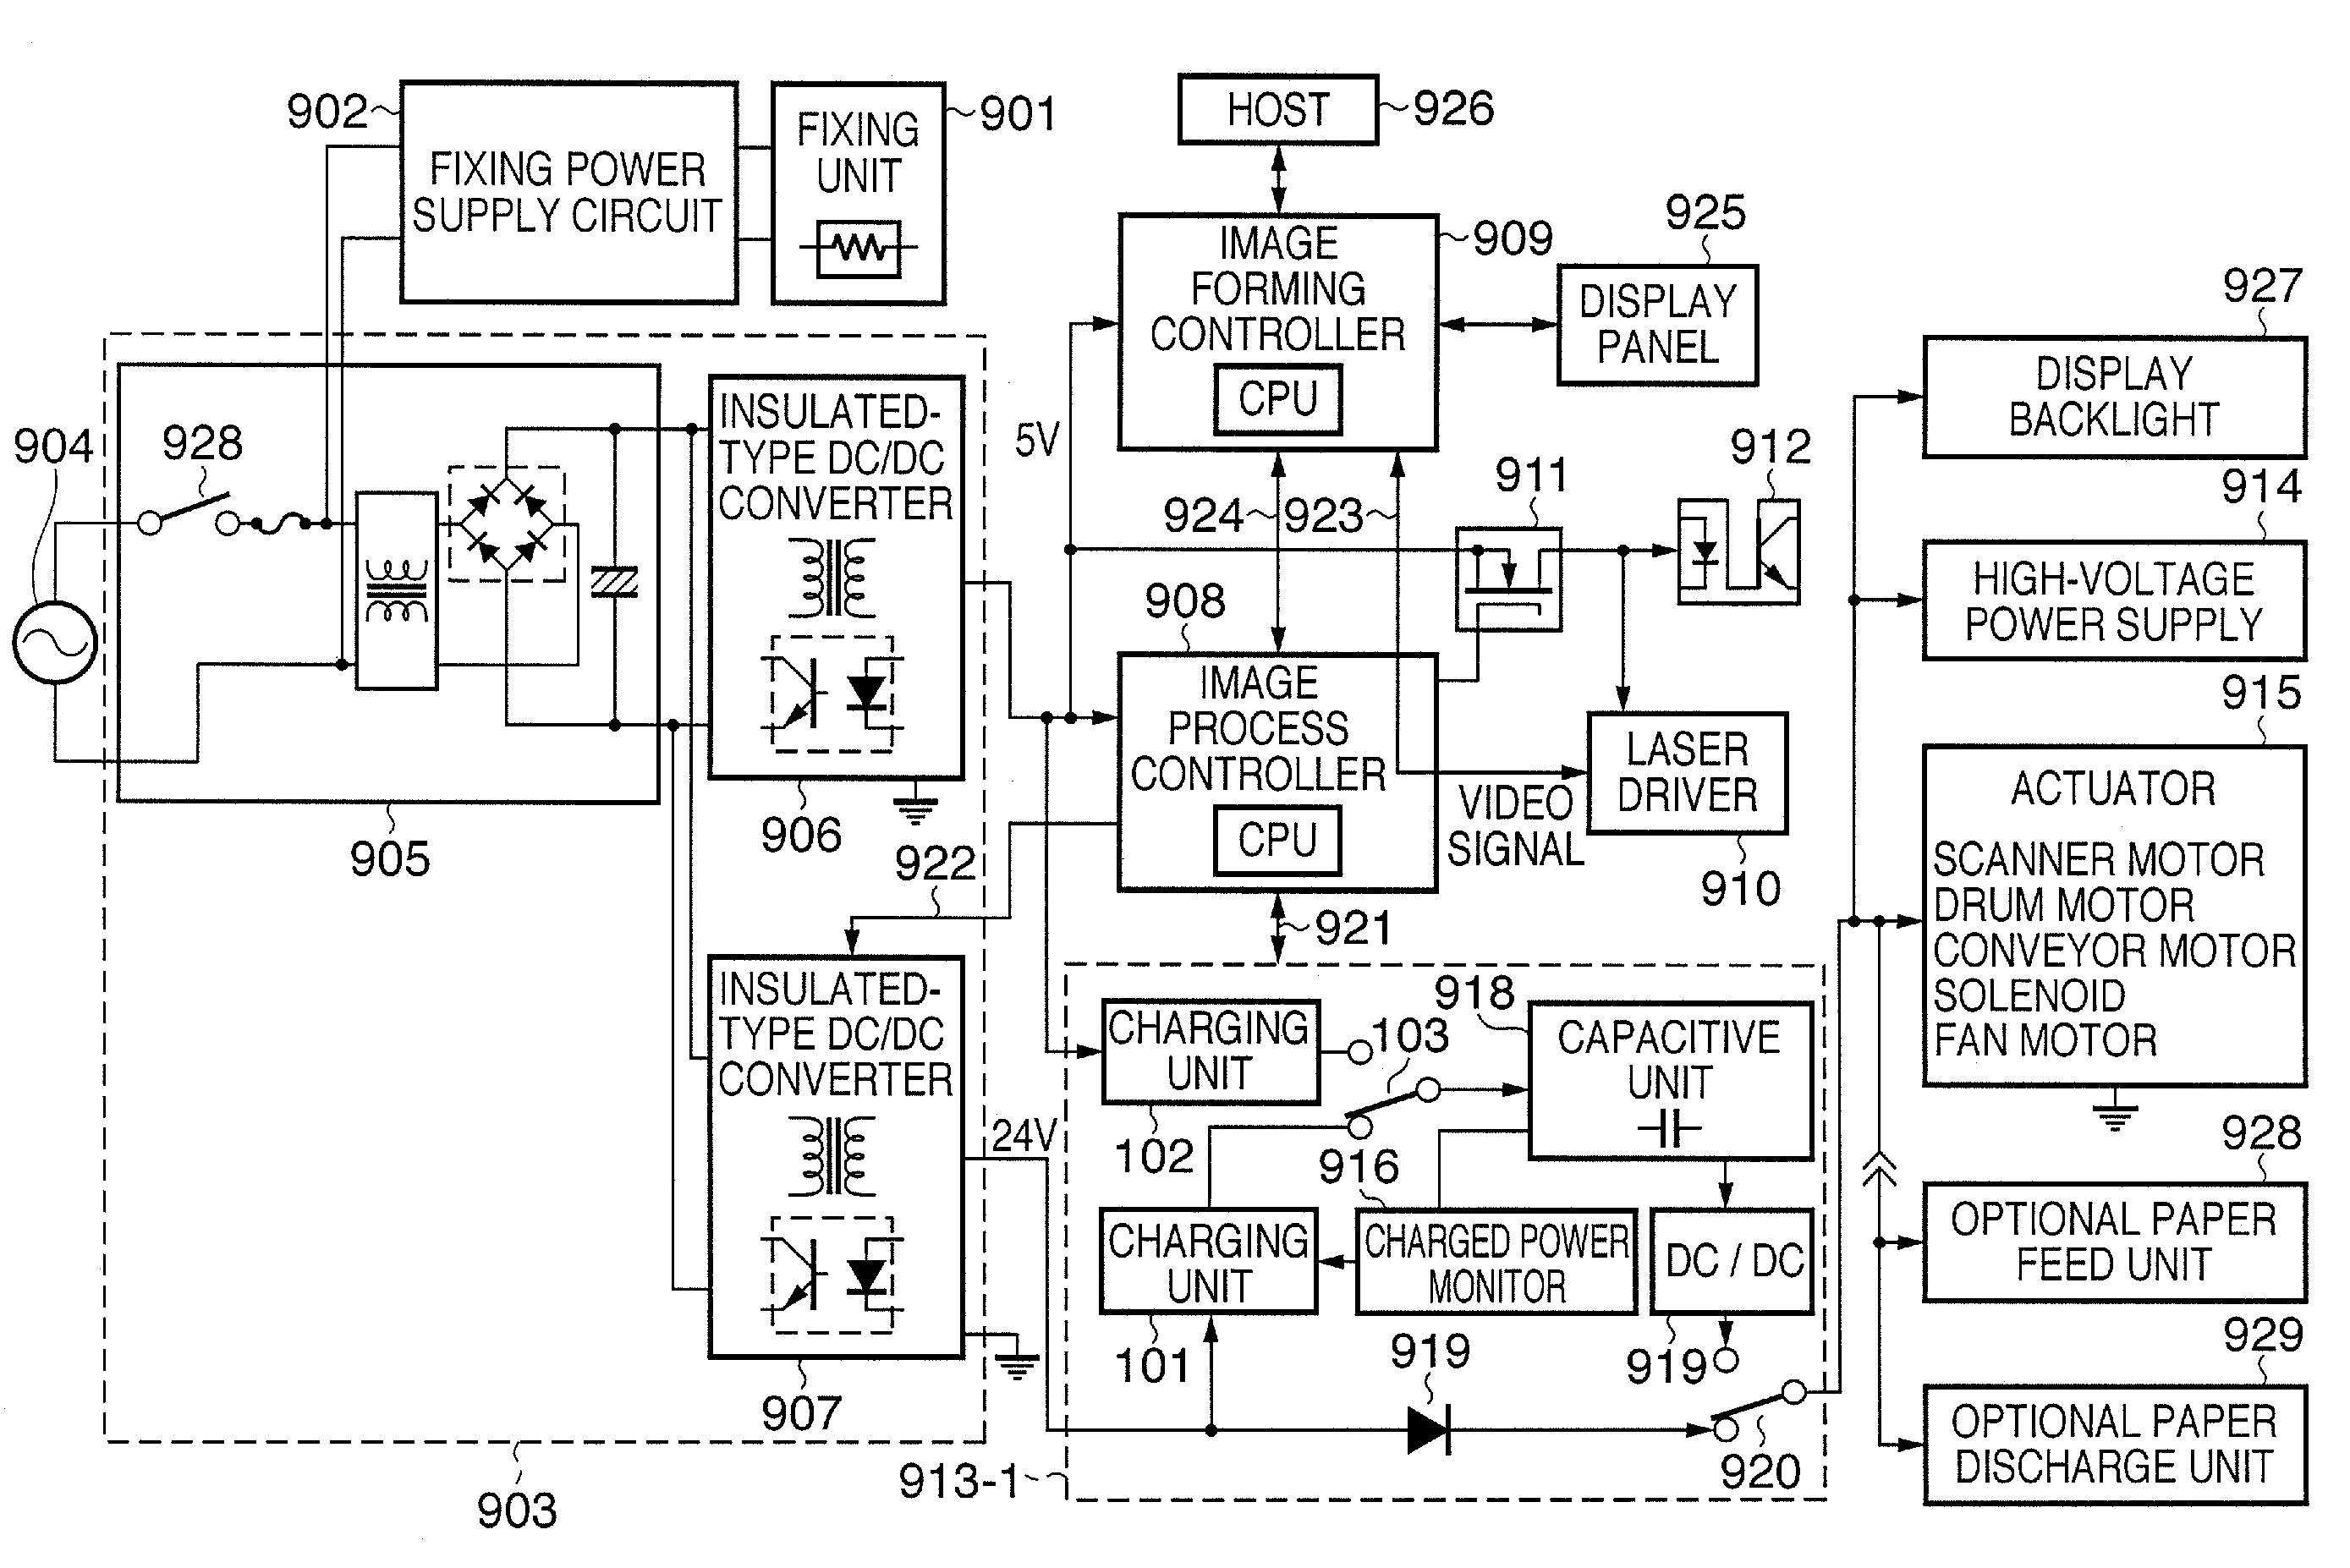 Image forming apparatus and method with charge switching to effect power supply control